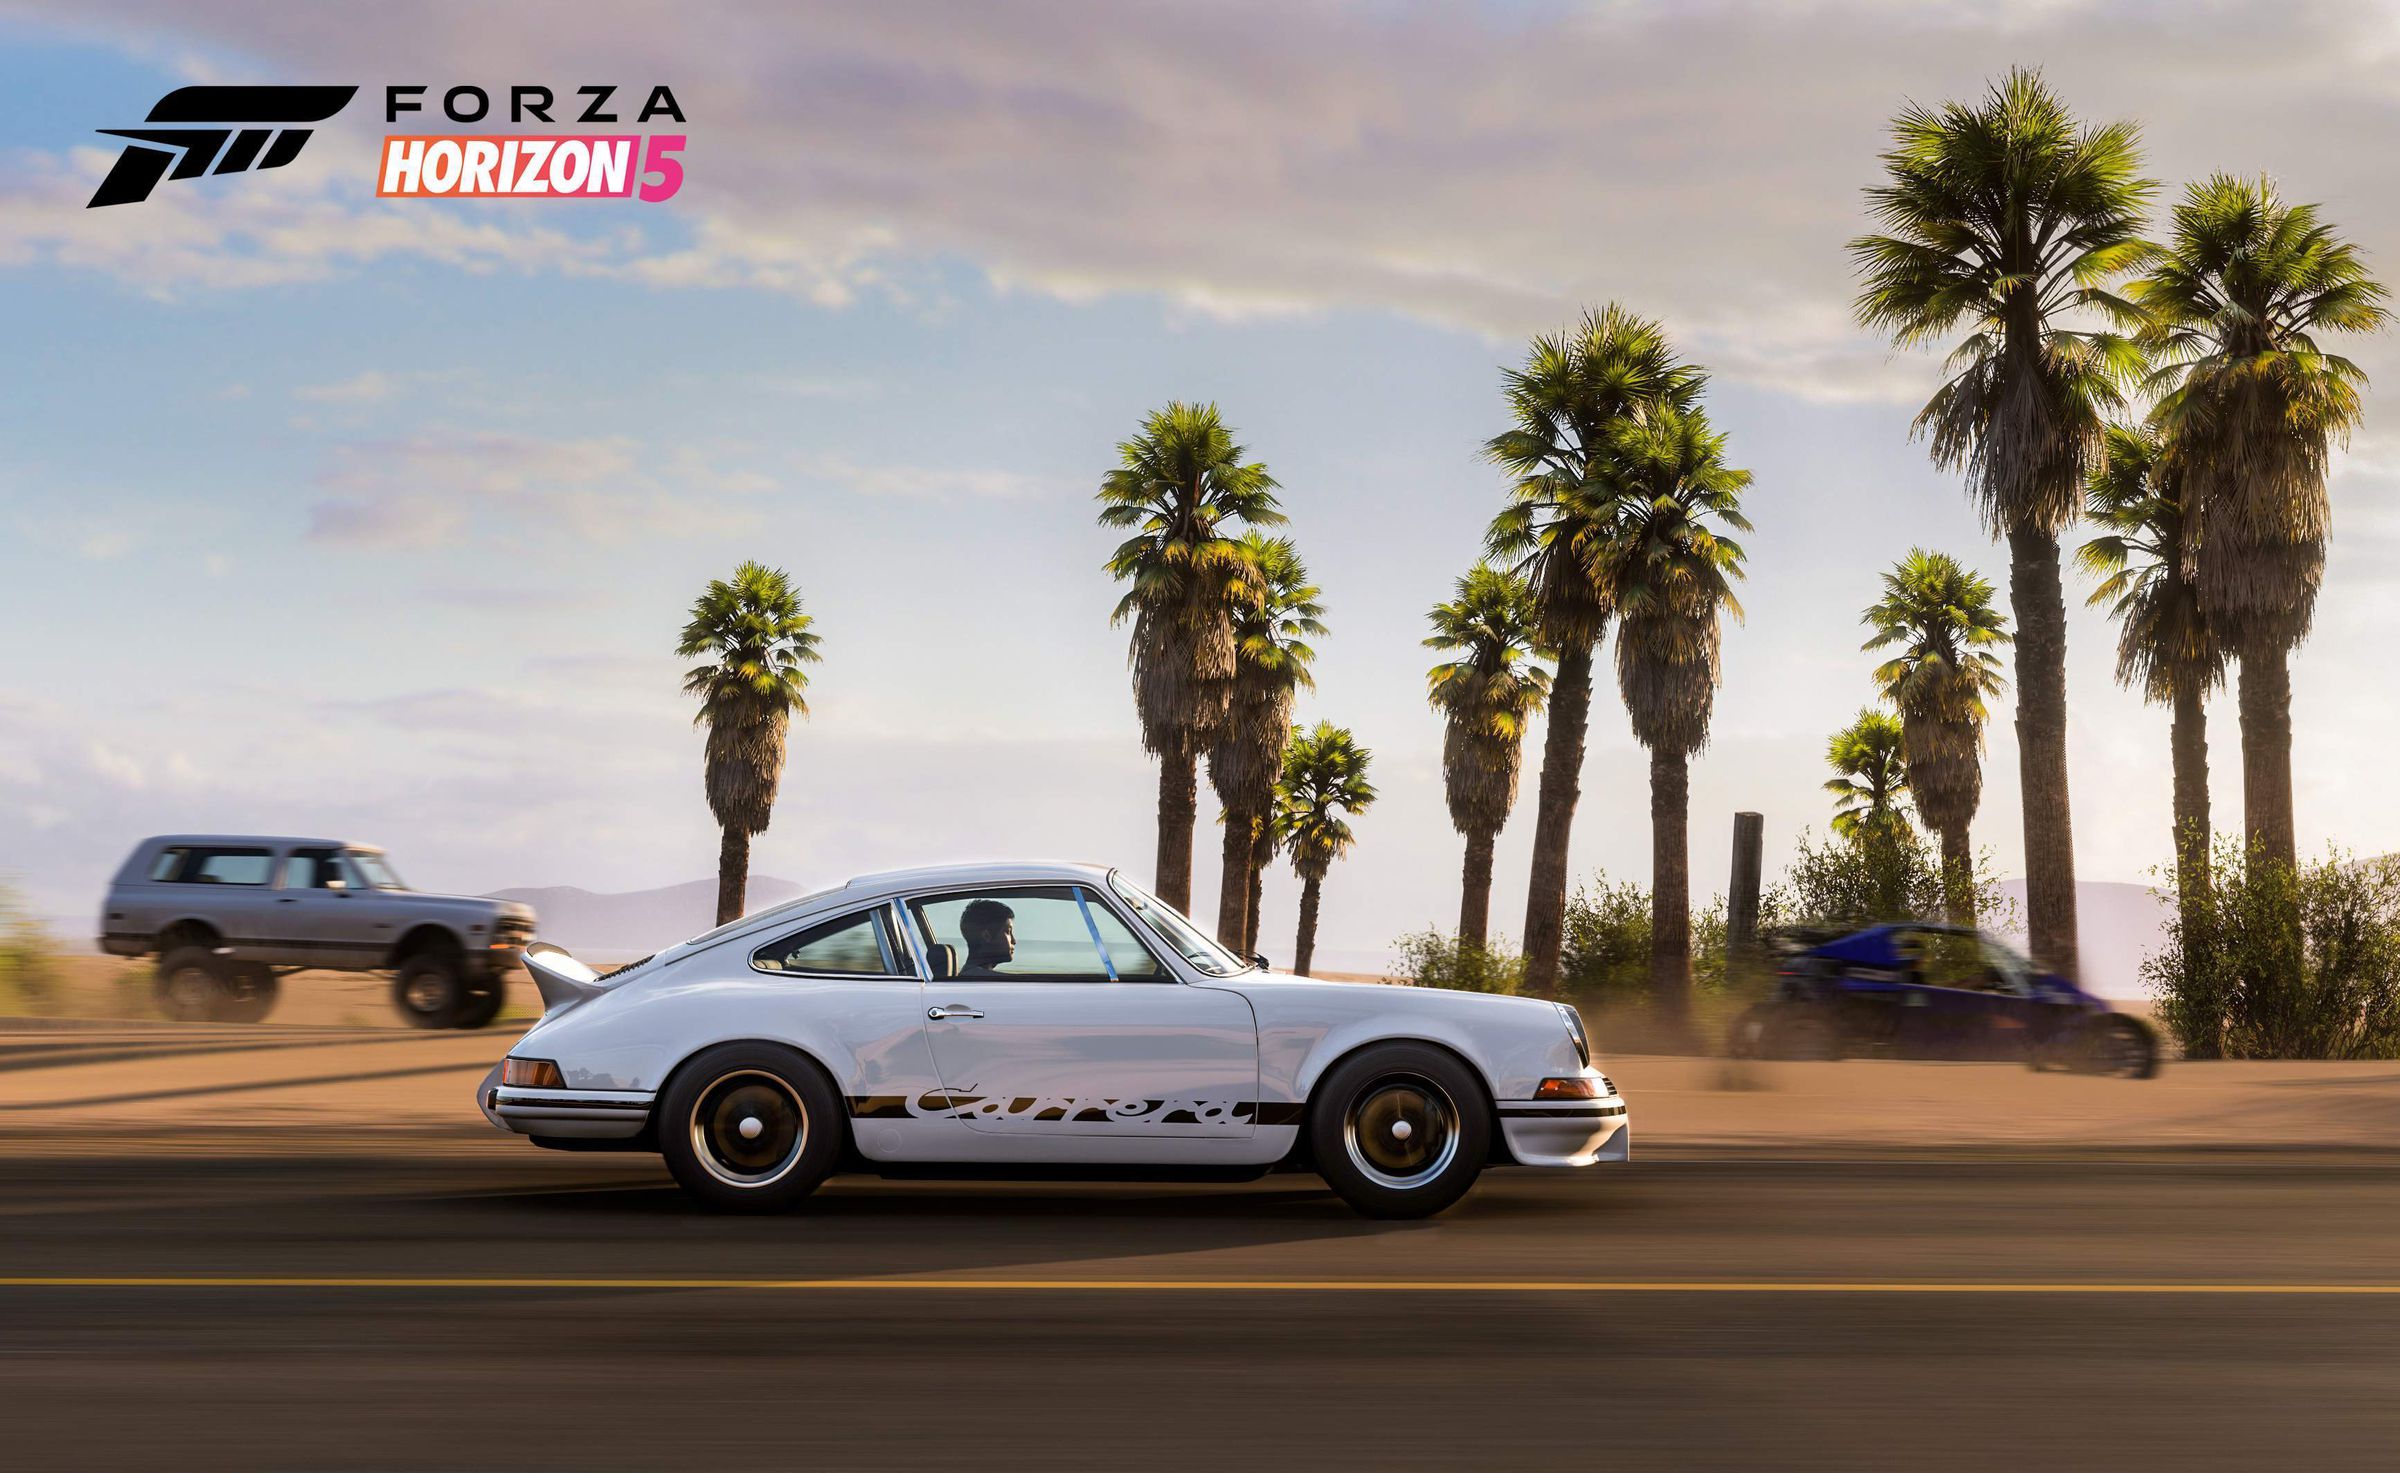 Forza Horizon 5 on PC is getting a lot of graphical improvements